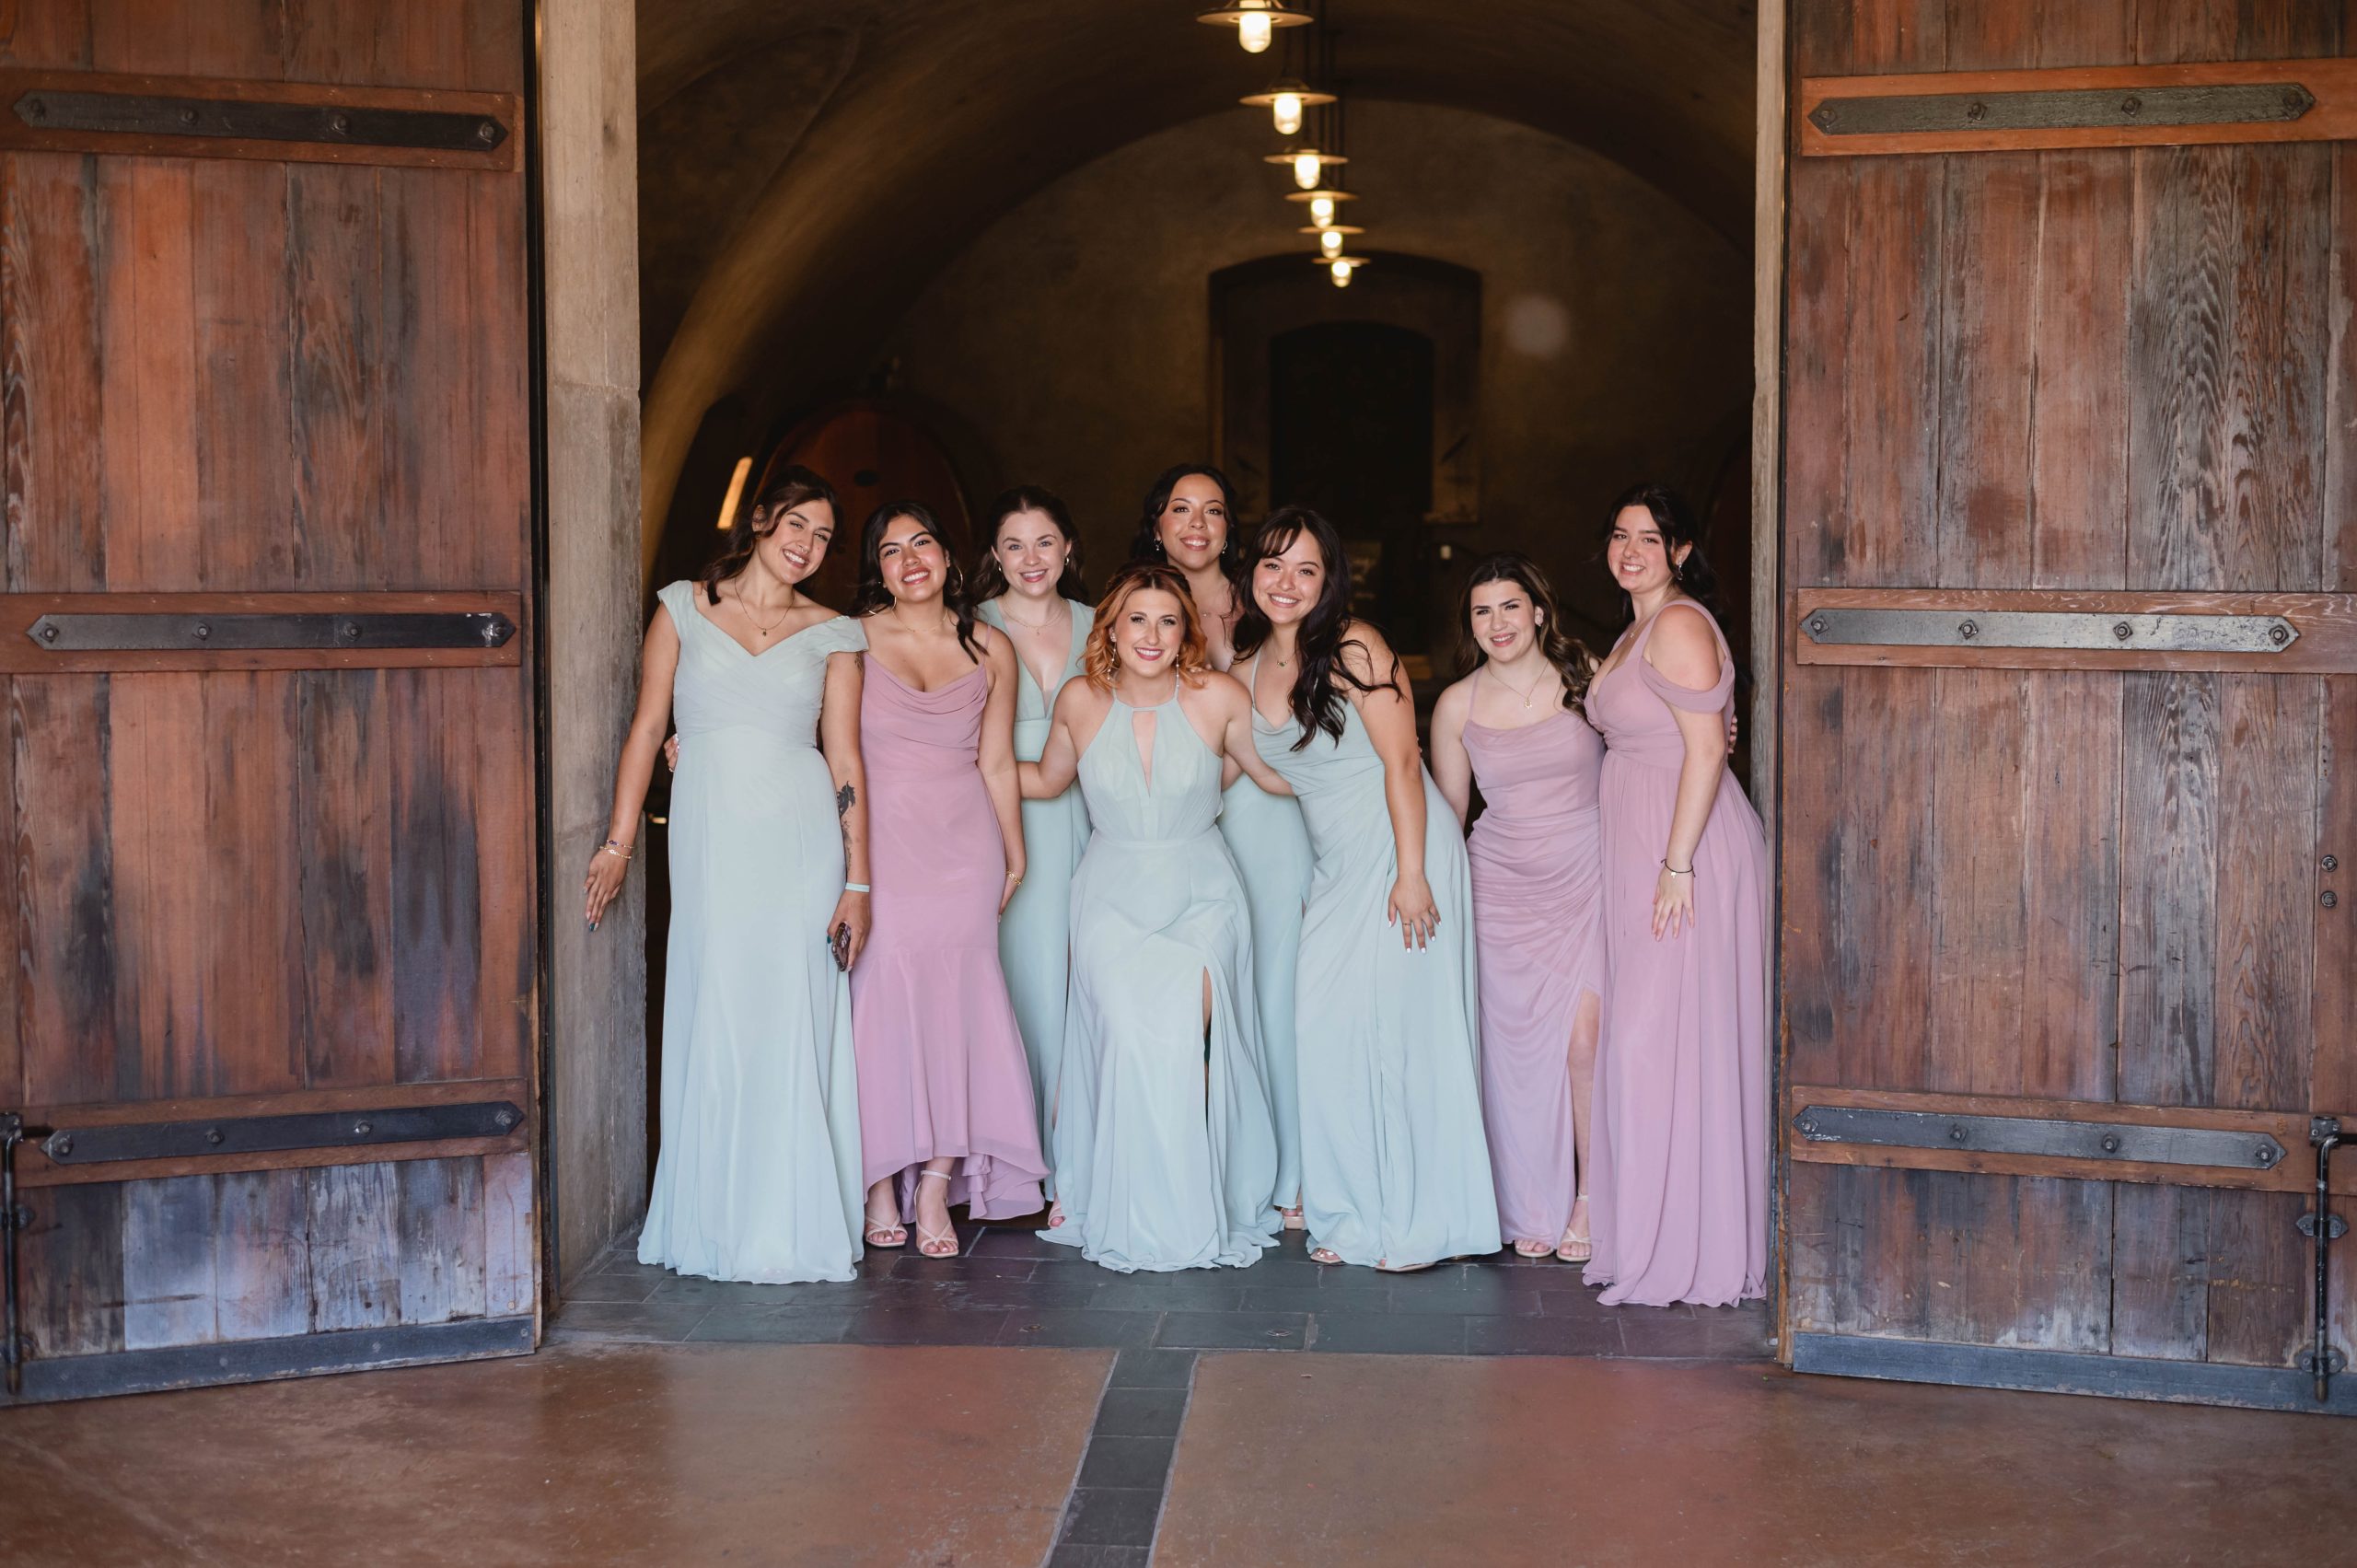 Bridesmaids and Maid of honor MOH waiting to see the bride reveal her wedding dress to them at Viansa Winery in Sonoma